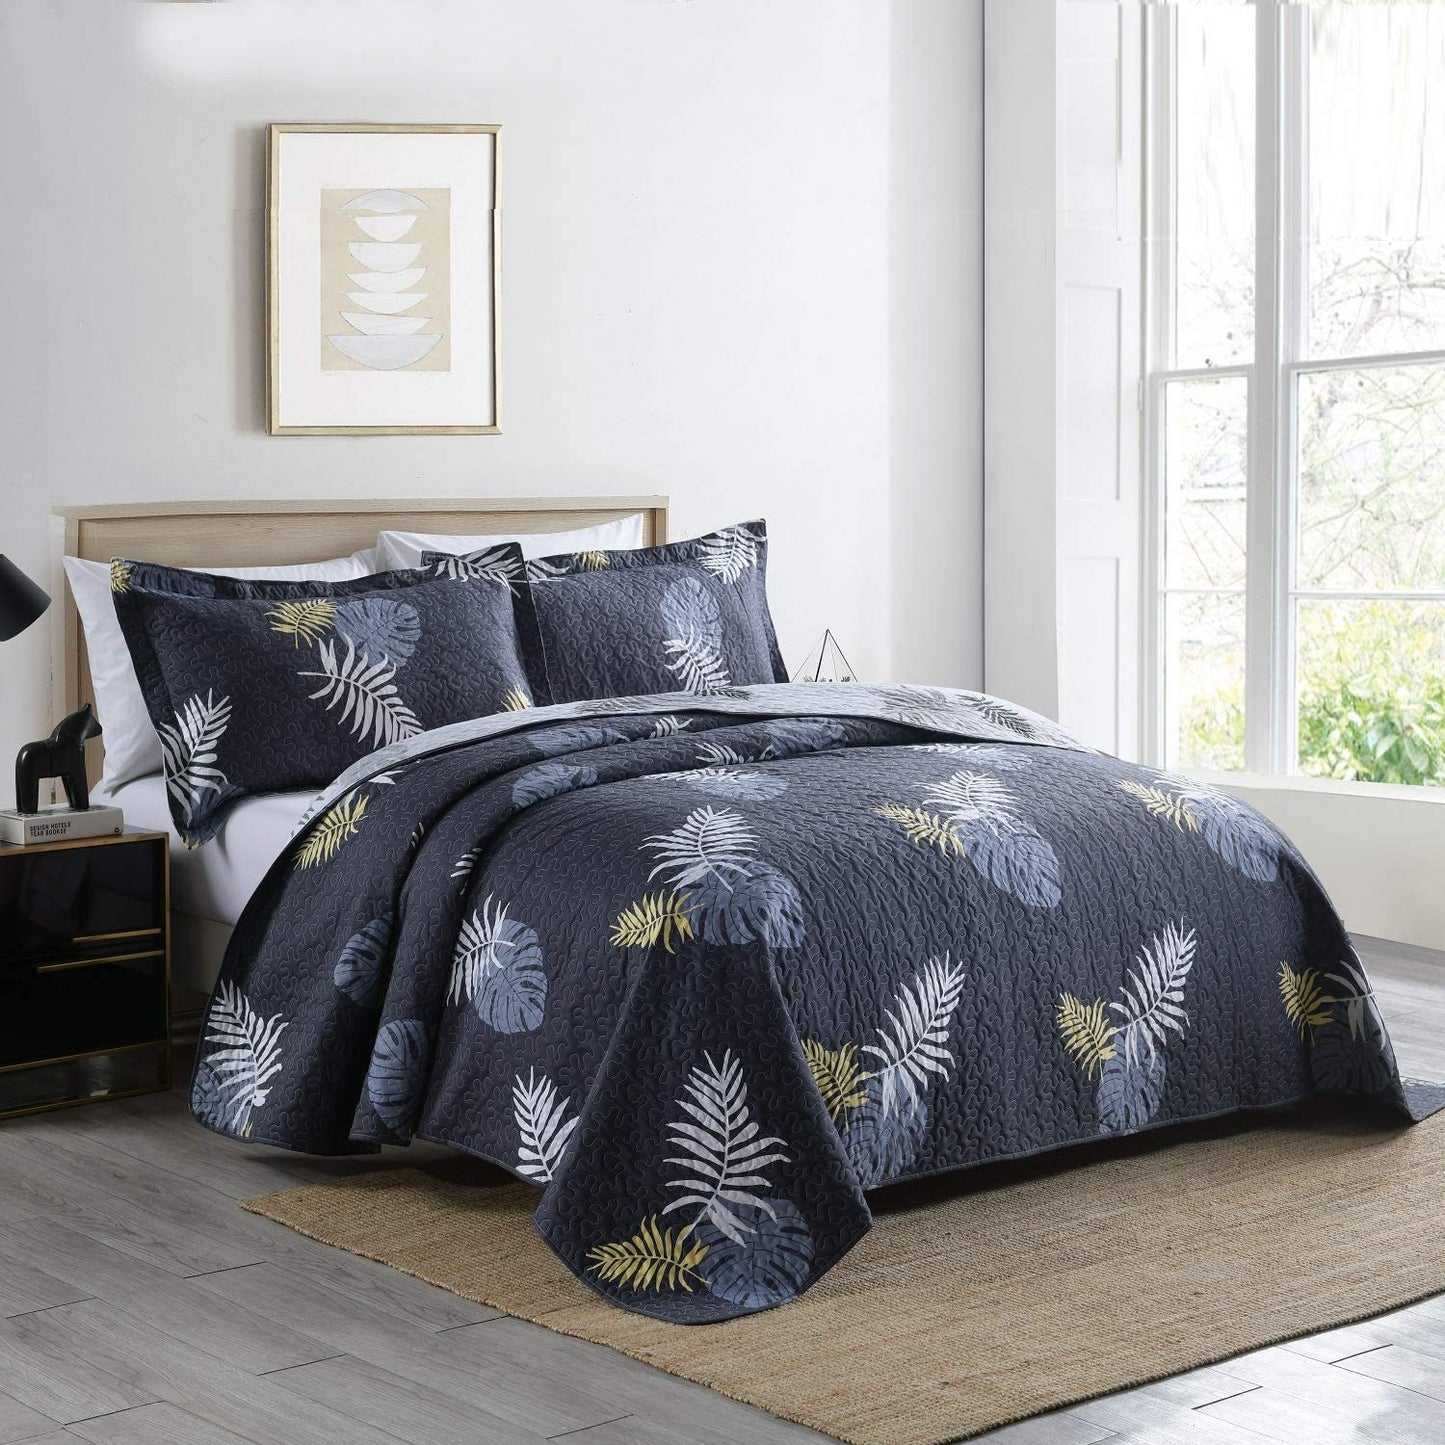 Navy and Leaf Print Lightweight Soft Quilt Set with 2 Pillow Shams